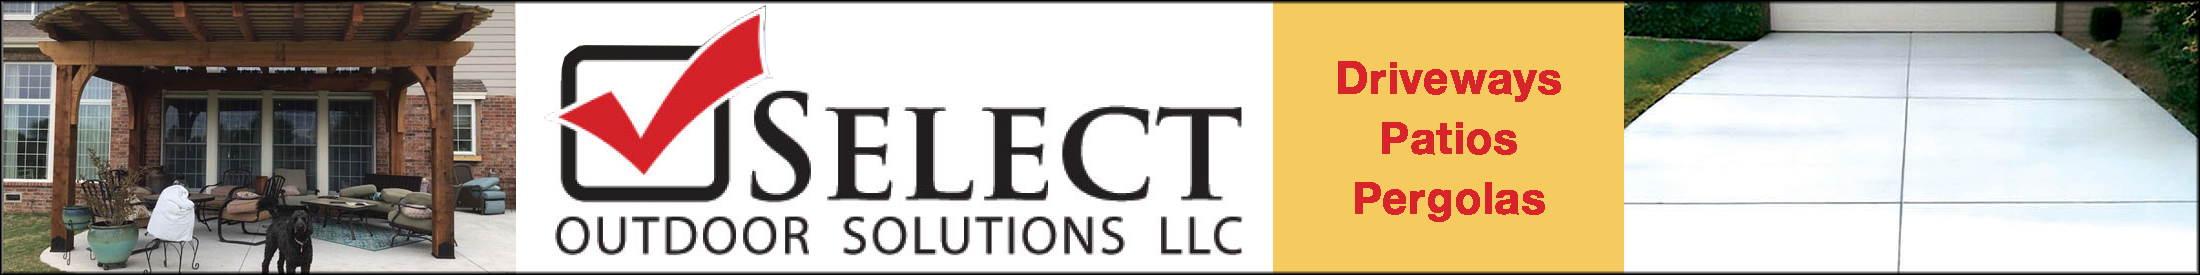 Image of Select Outdoor Solutions Advertisement